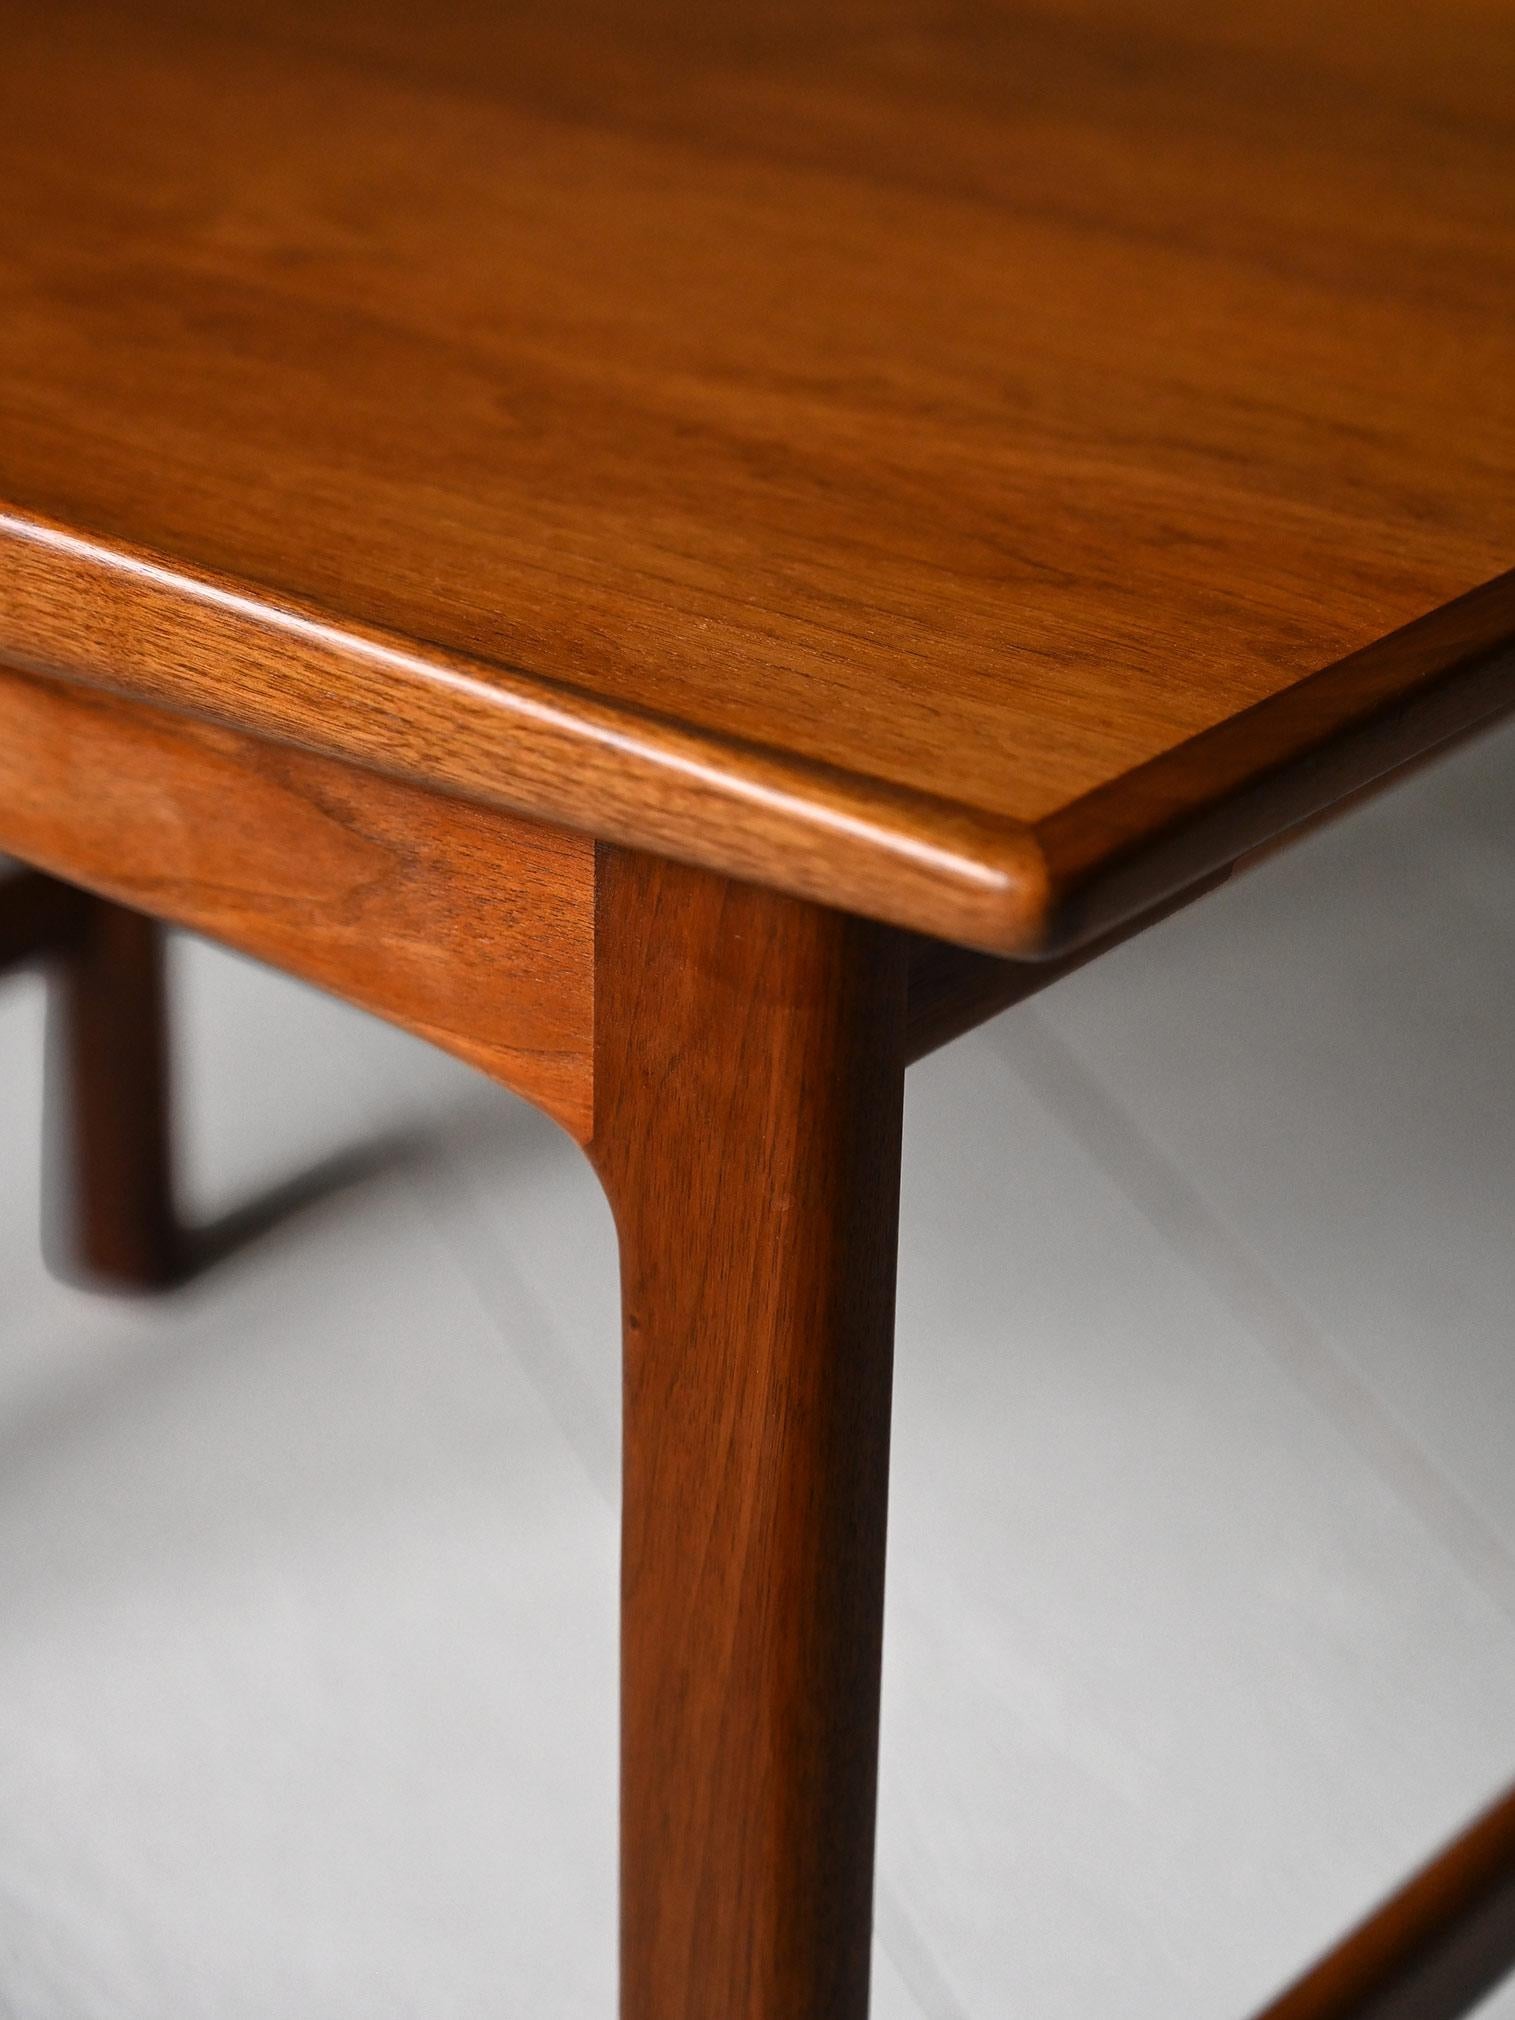 Teak 'Frisco' coffee table by Folke Ohlsson 1960s For Sale